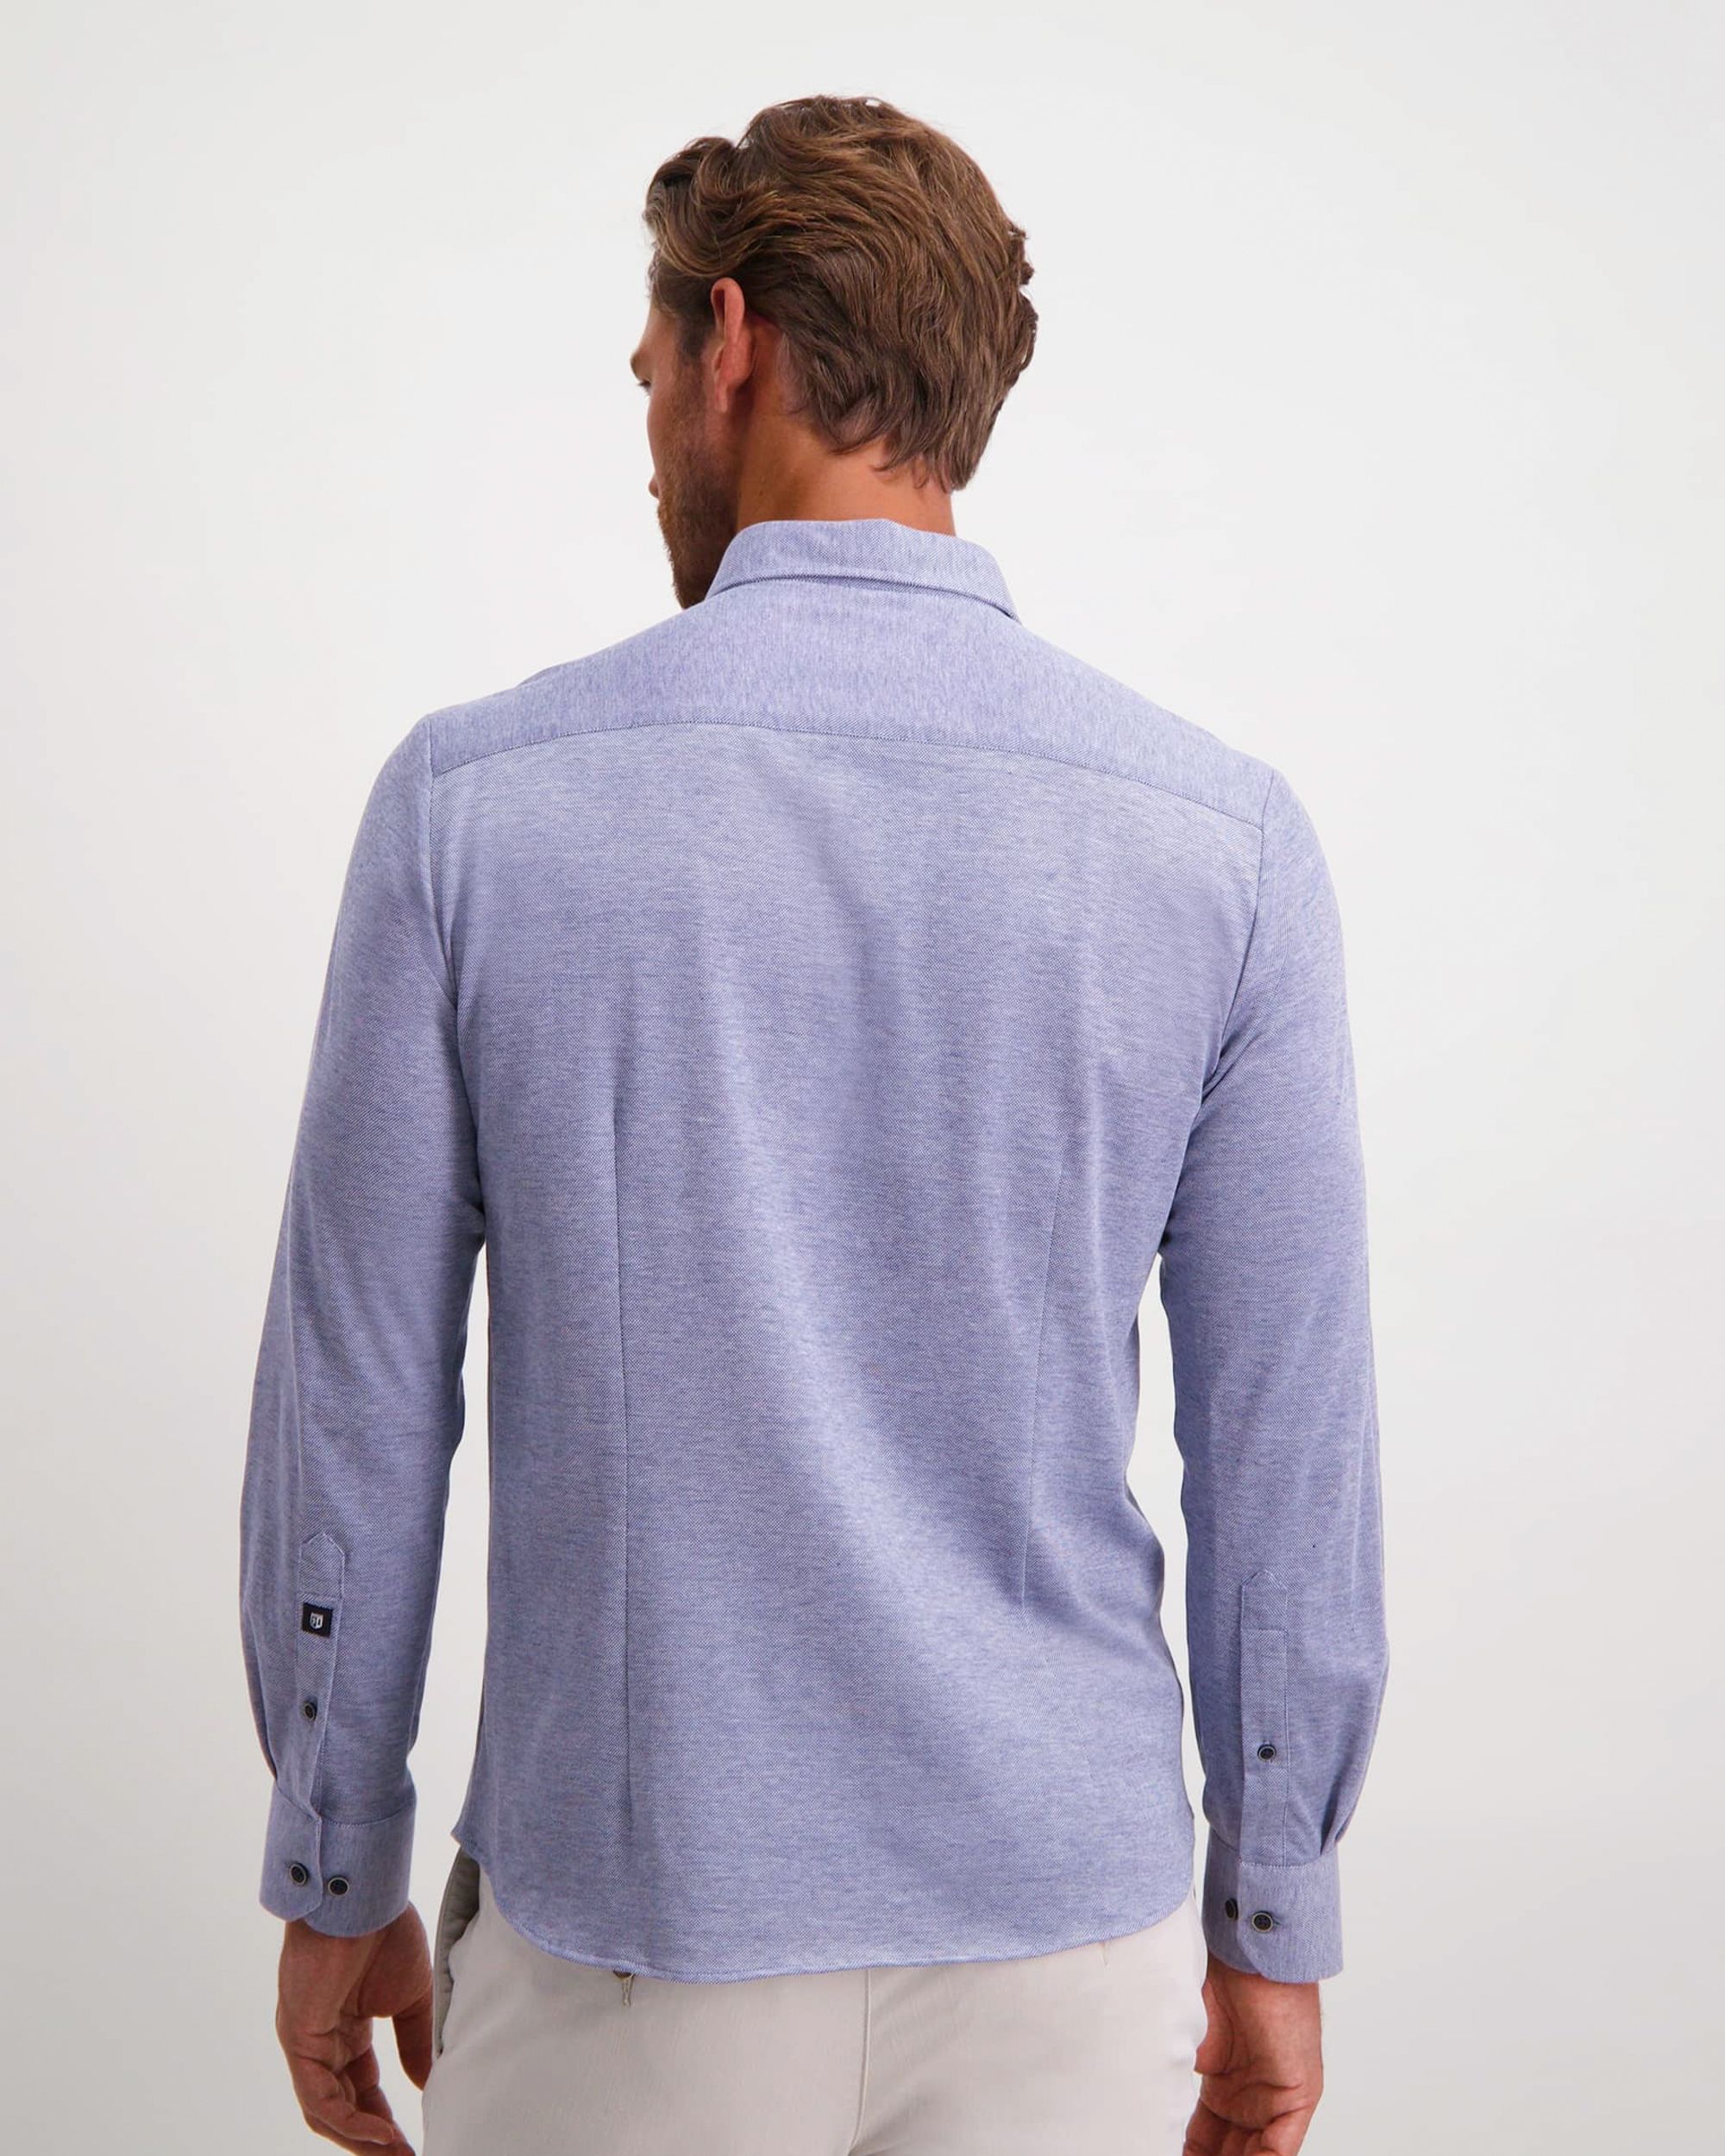 State of Art Casual Overhemd LM Donker blauw 095031-001-4XL